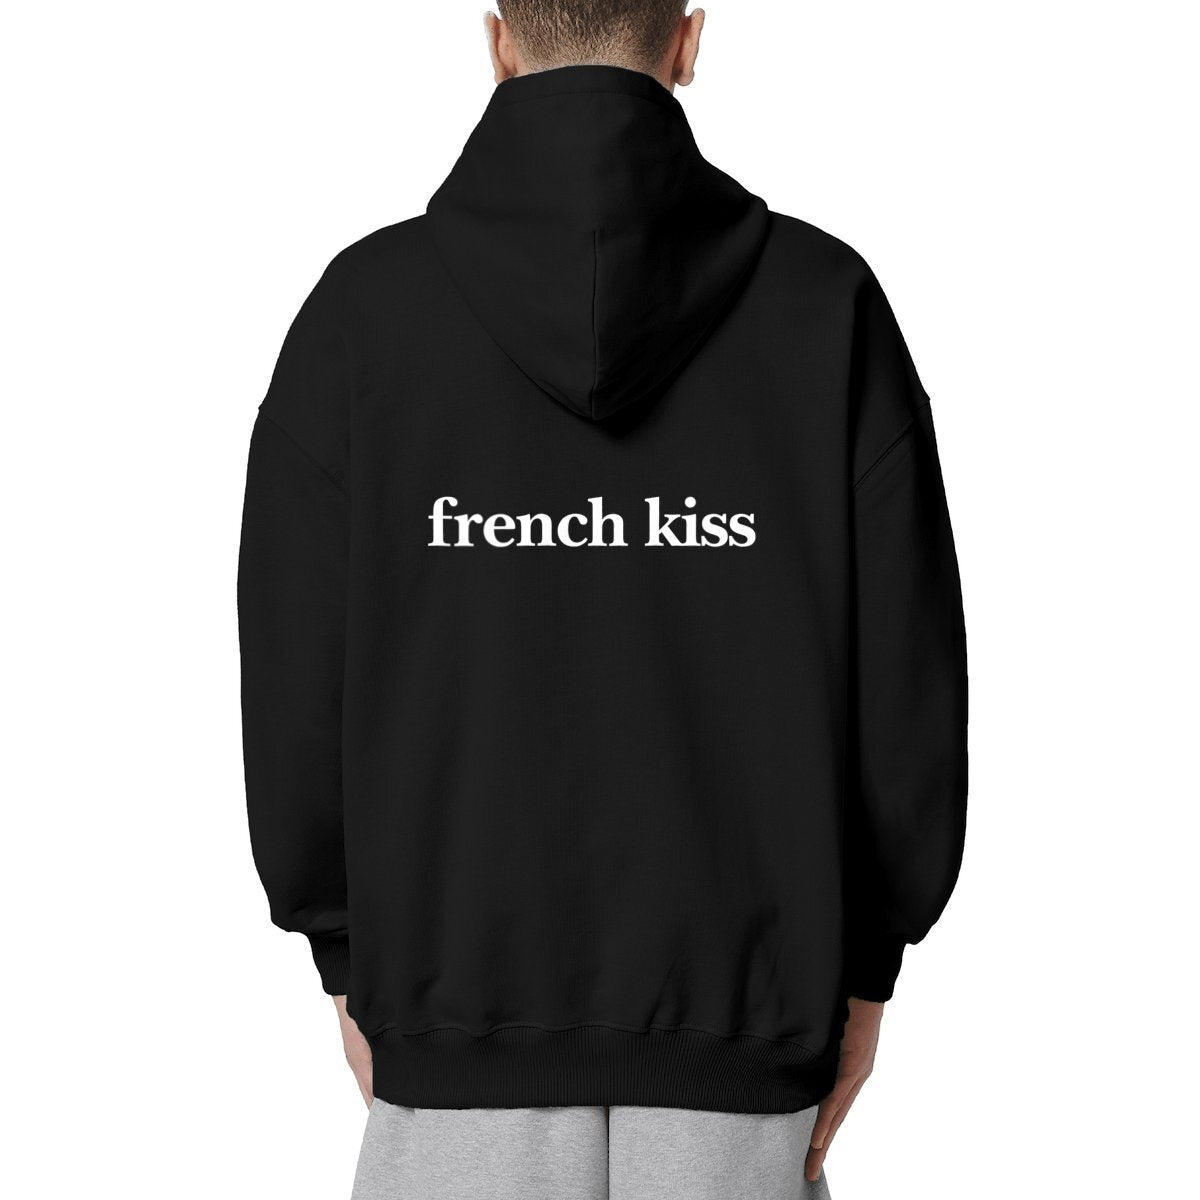 french kiss hoodie oversized. garçon garçon essentiel oversized hoodie. Sleek in black and whispering Parisian chic, this hoodie is the sartorial whisper of 'garçon garçon' — a statement of understated elegance. Perfect for those who carry a piece of Paris in their hearts and a touch of audacity on their sleeves.